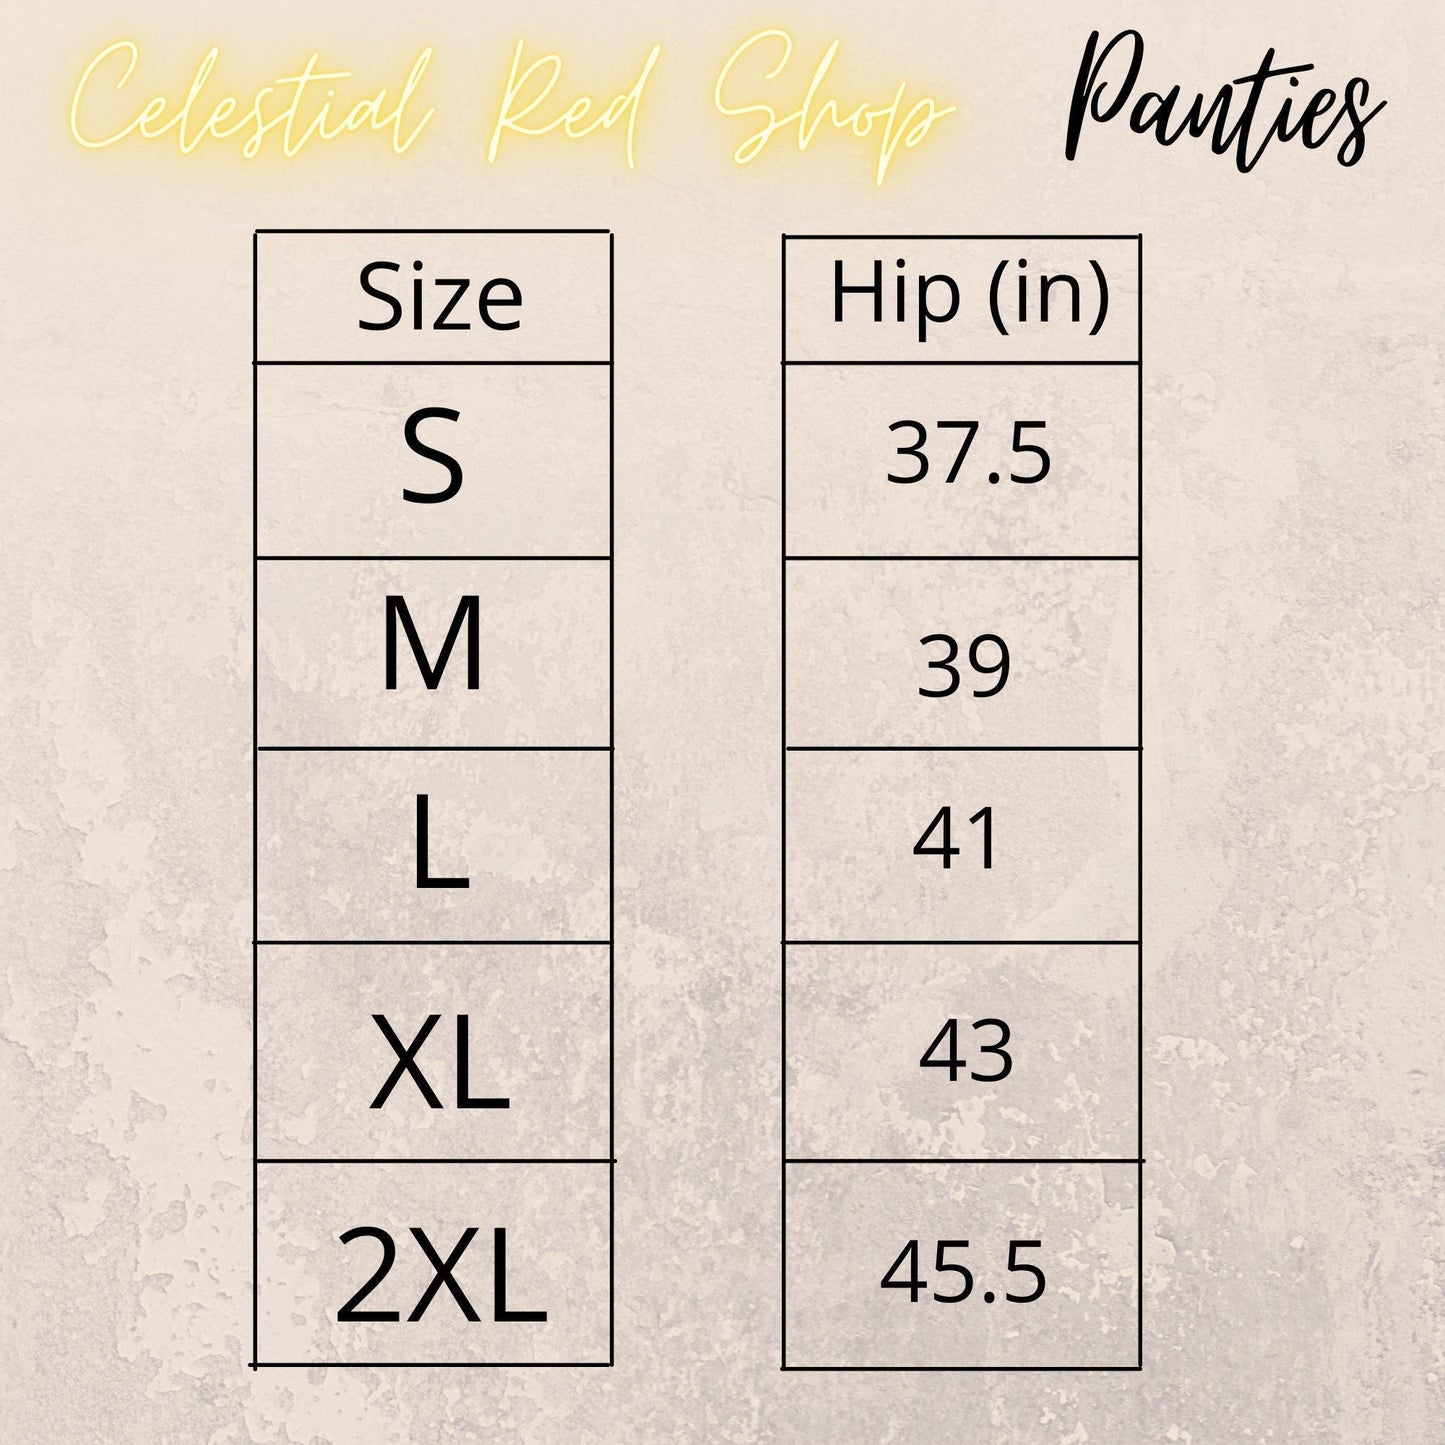 Celestial Red Shop - Panties Size Chart